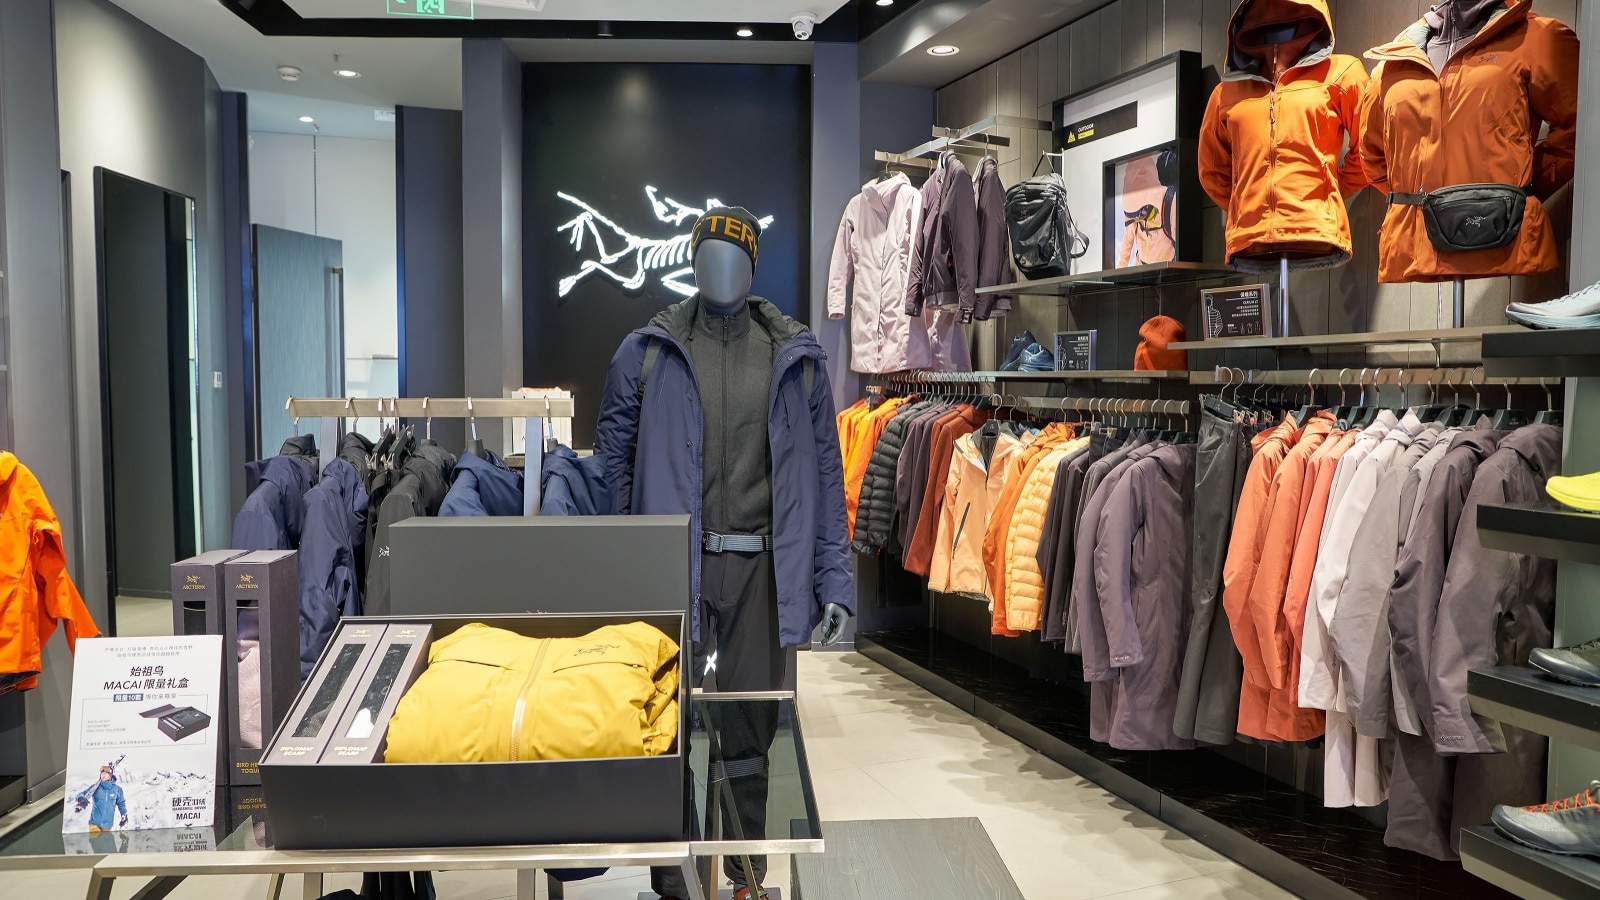 SHENZHEN, CHINA - CIRCA NOVEMBER, 2019: interior shot of Arc'teryx store. Arc'teryx is a Canadian high-end design company specializing in outdoor apparel.